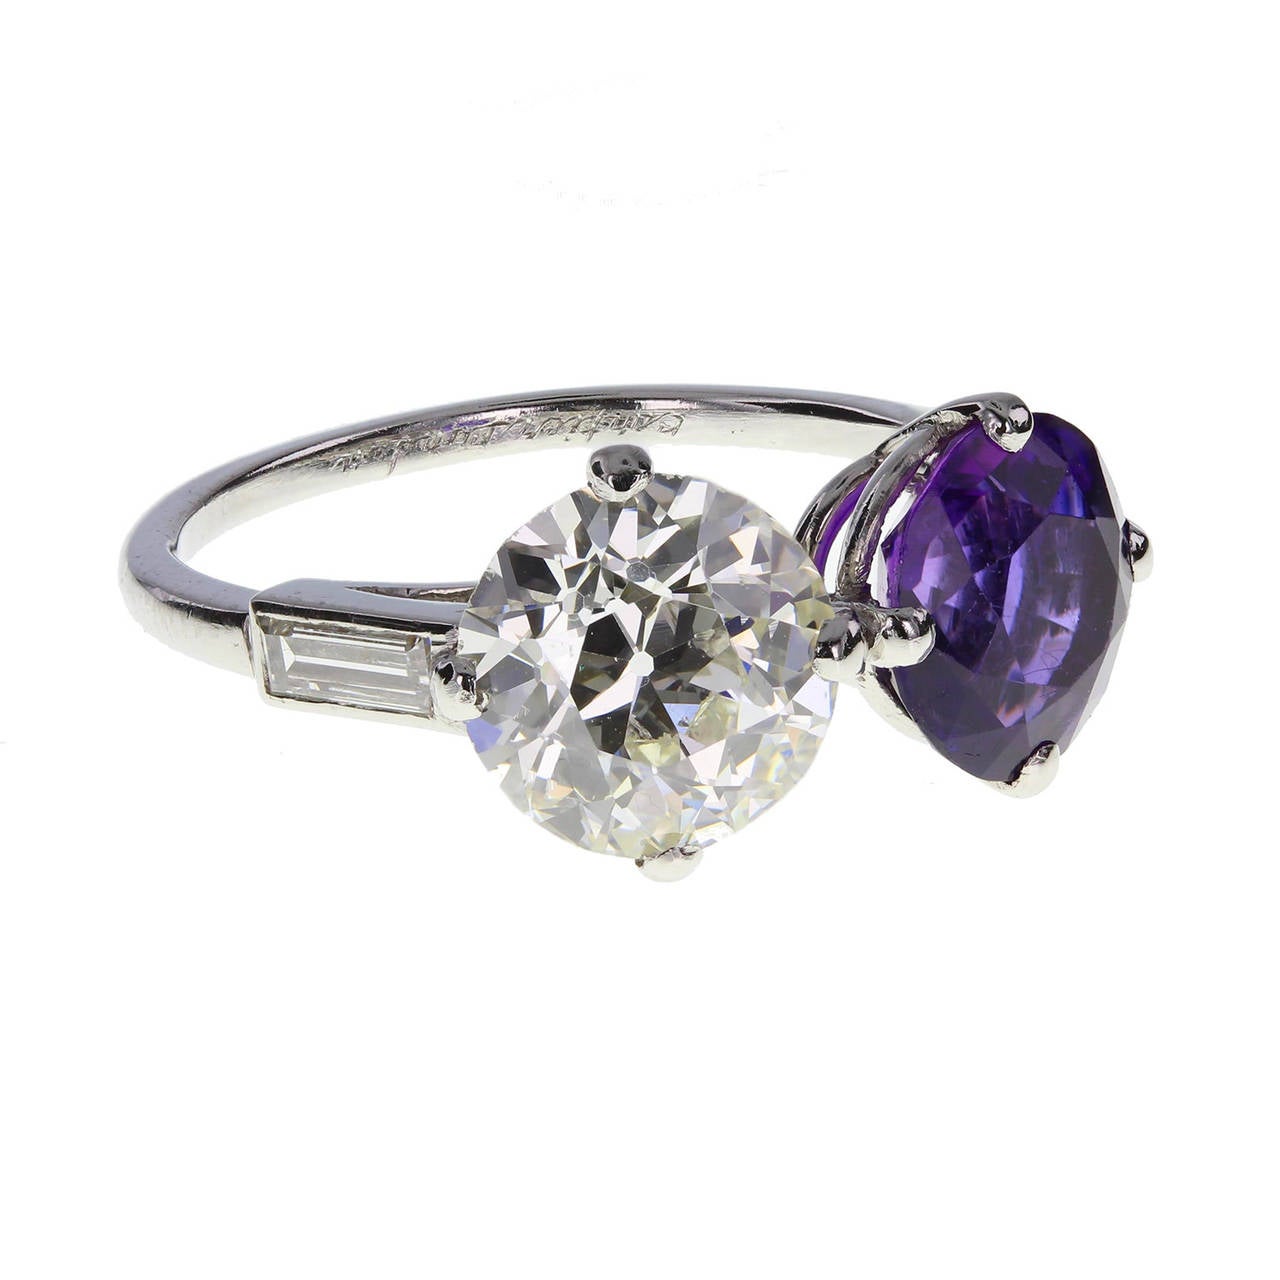 In excellent condition, this two-stone ring in platinum by Cartier features a 1.75 carat, old-cut diamond and a 1.40 carat round-cut amethyst of deep purple, mounted side-by-side each in four claws. Exceptional sparkle and scintillation. Signed